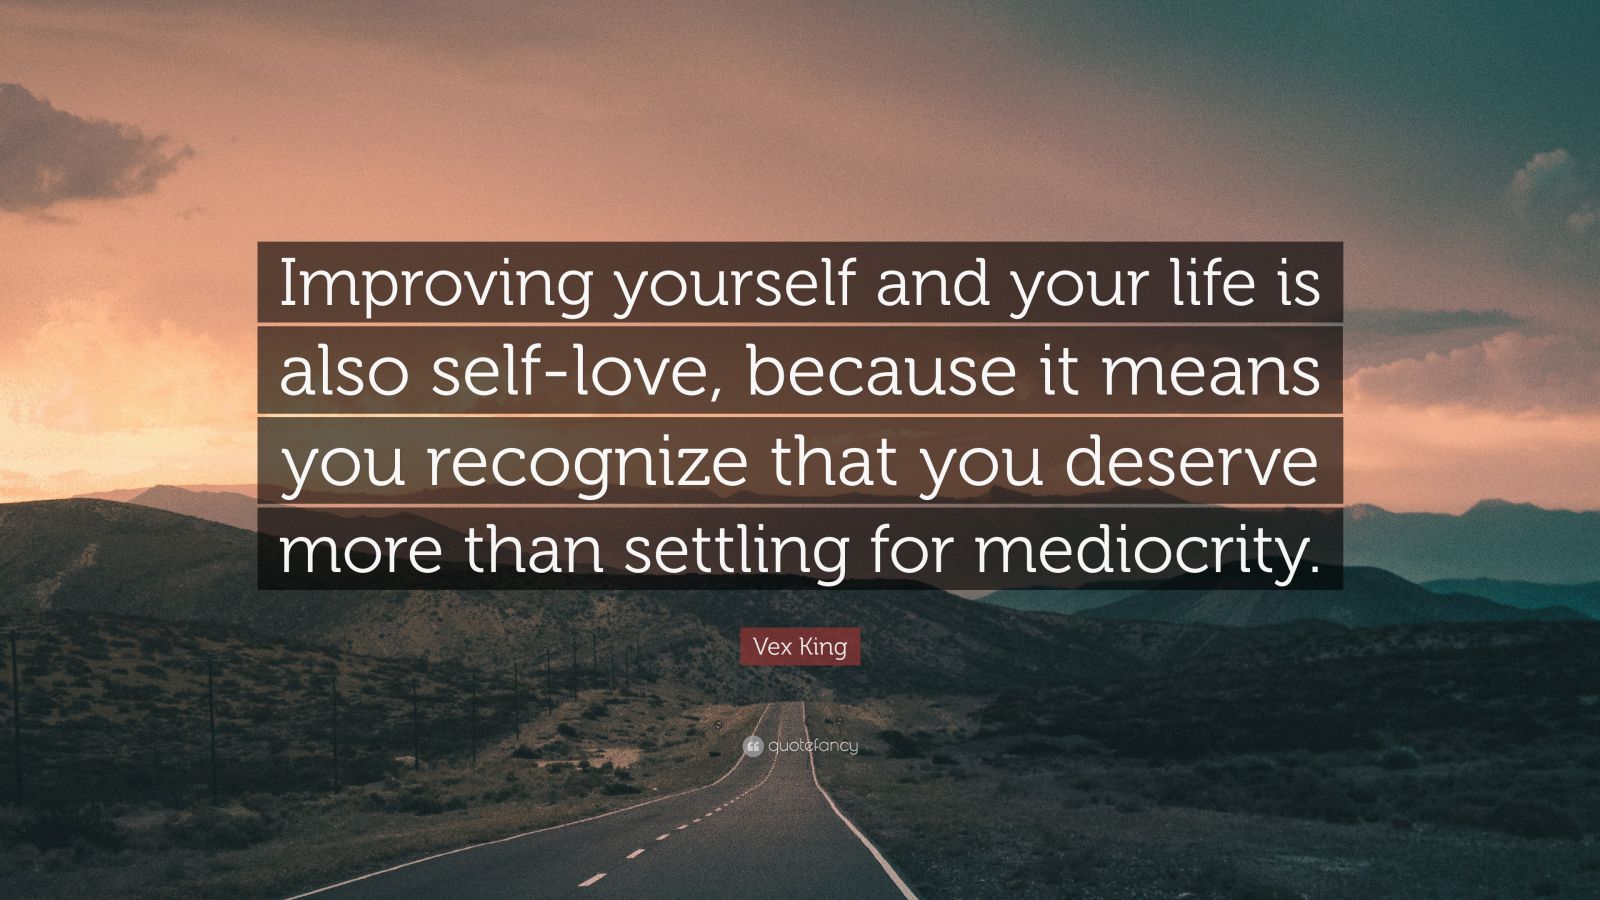 Vex King Quote: “Improving yourself and your life is also self-love ...